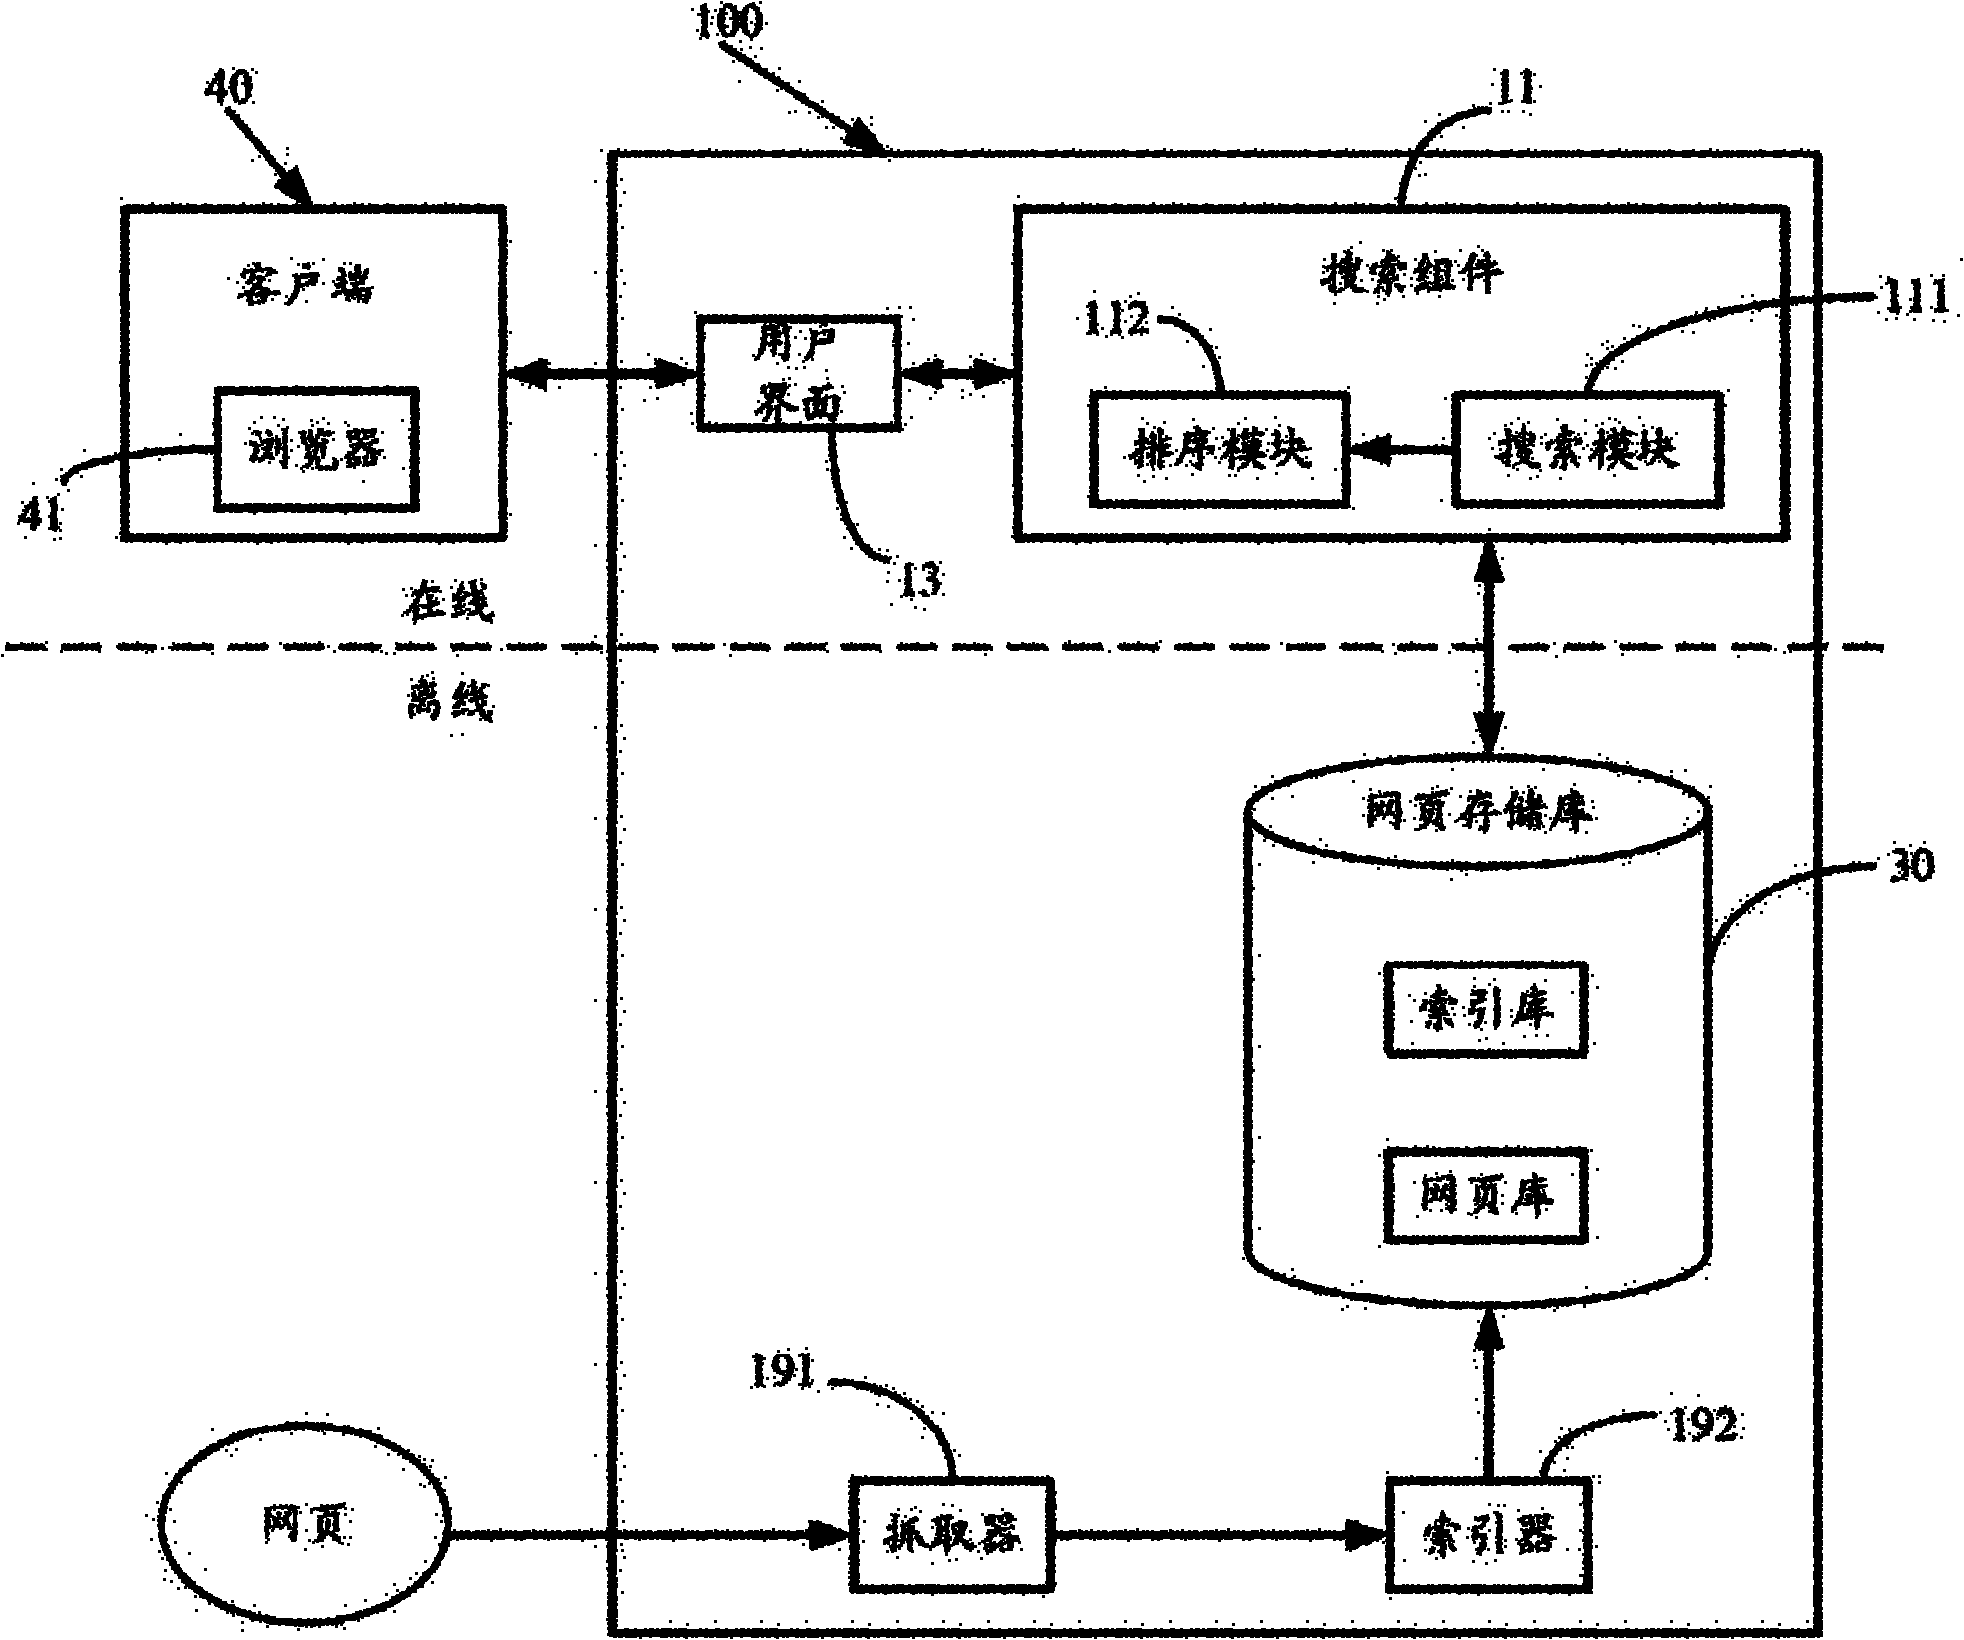 Method for searching structured data and search engine system for implementing same